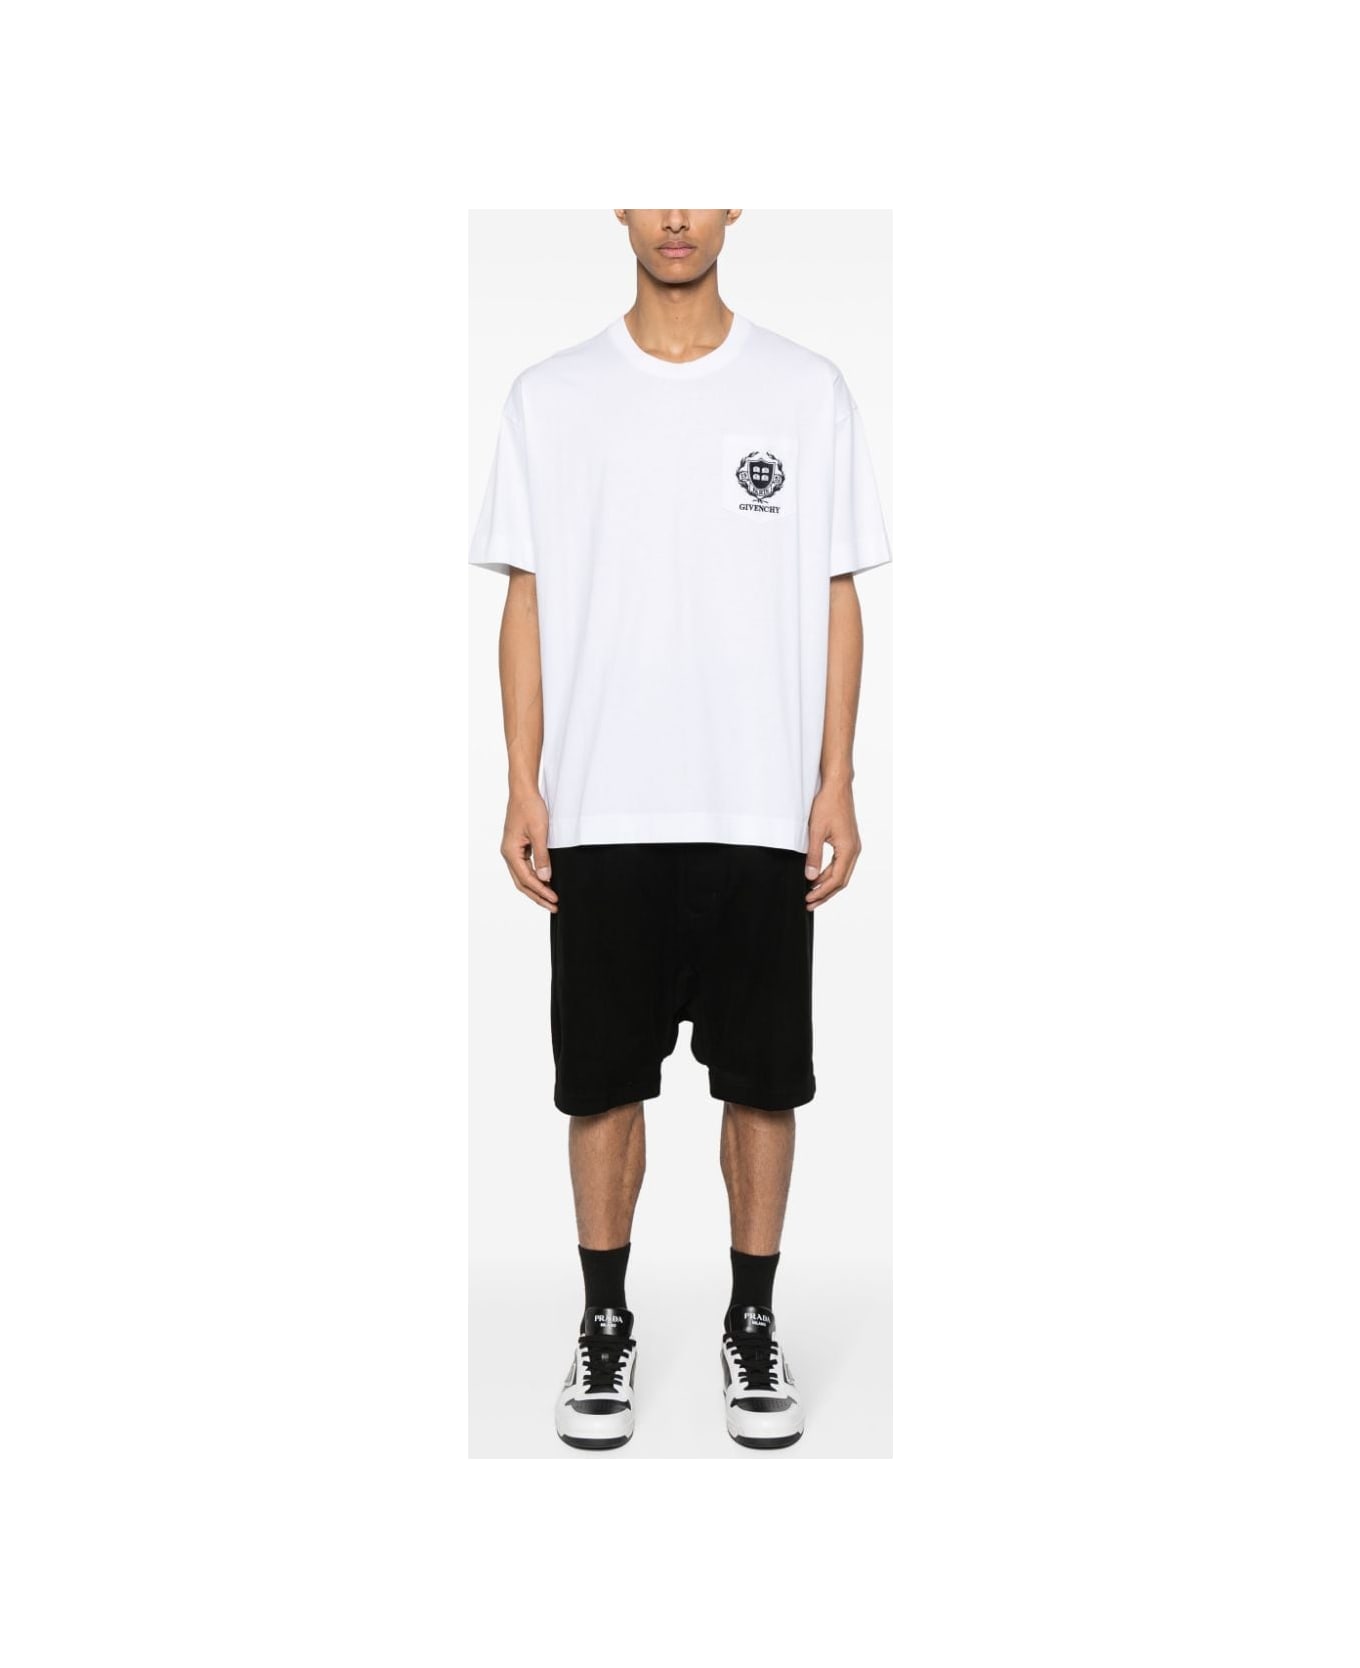 Givenchy Crest T-shirt - White シャツ